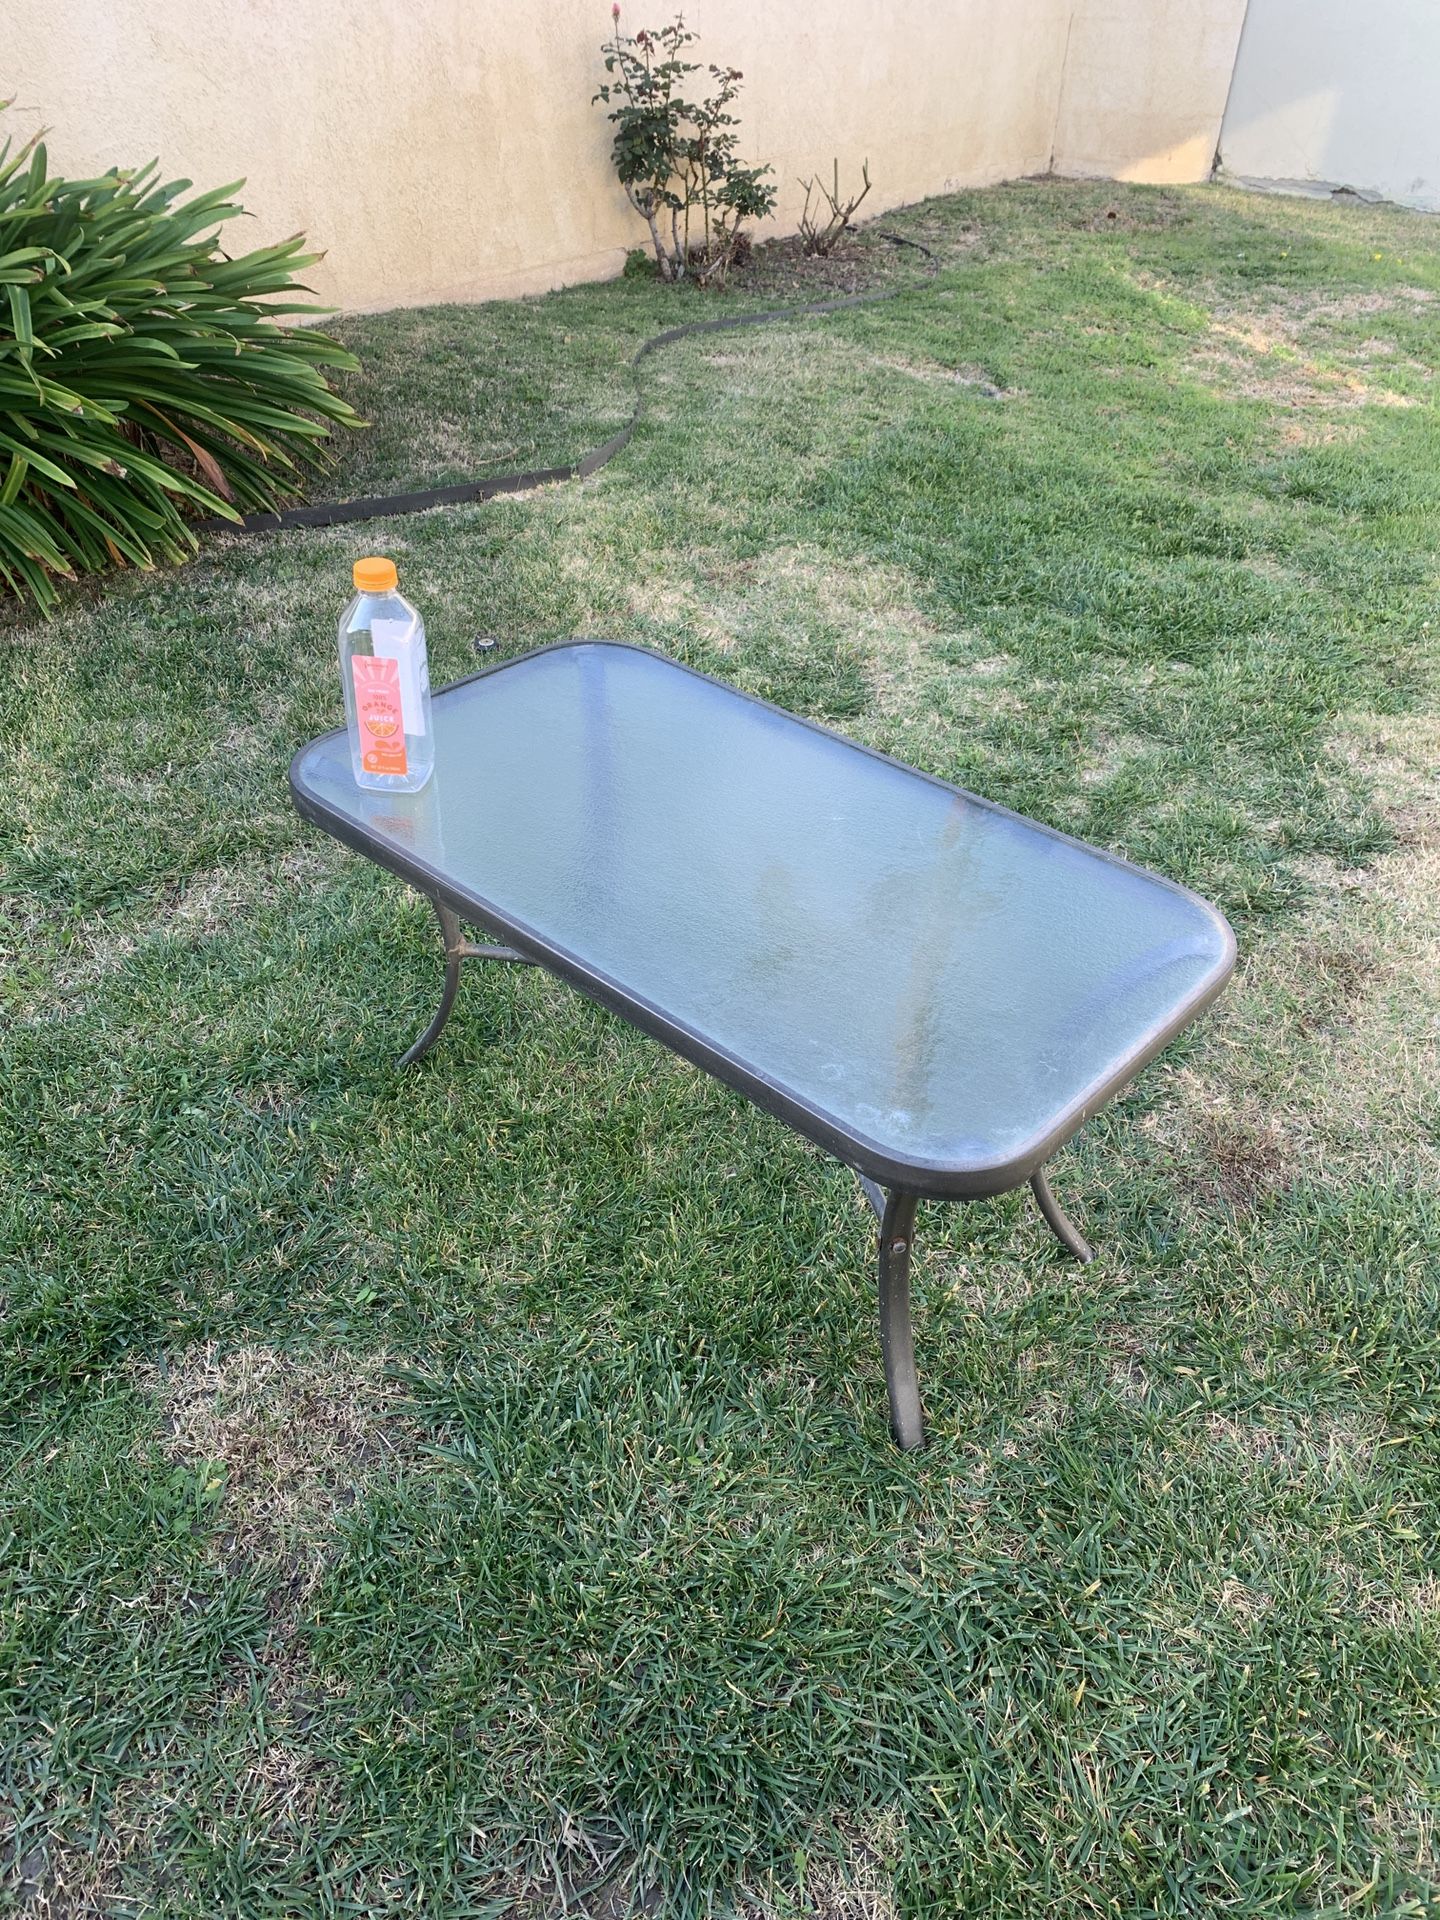 FREE Small Patio Table 35x18x15”